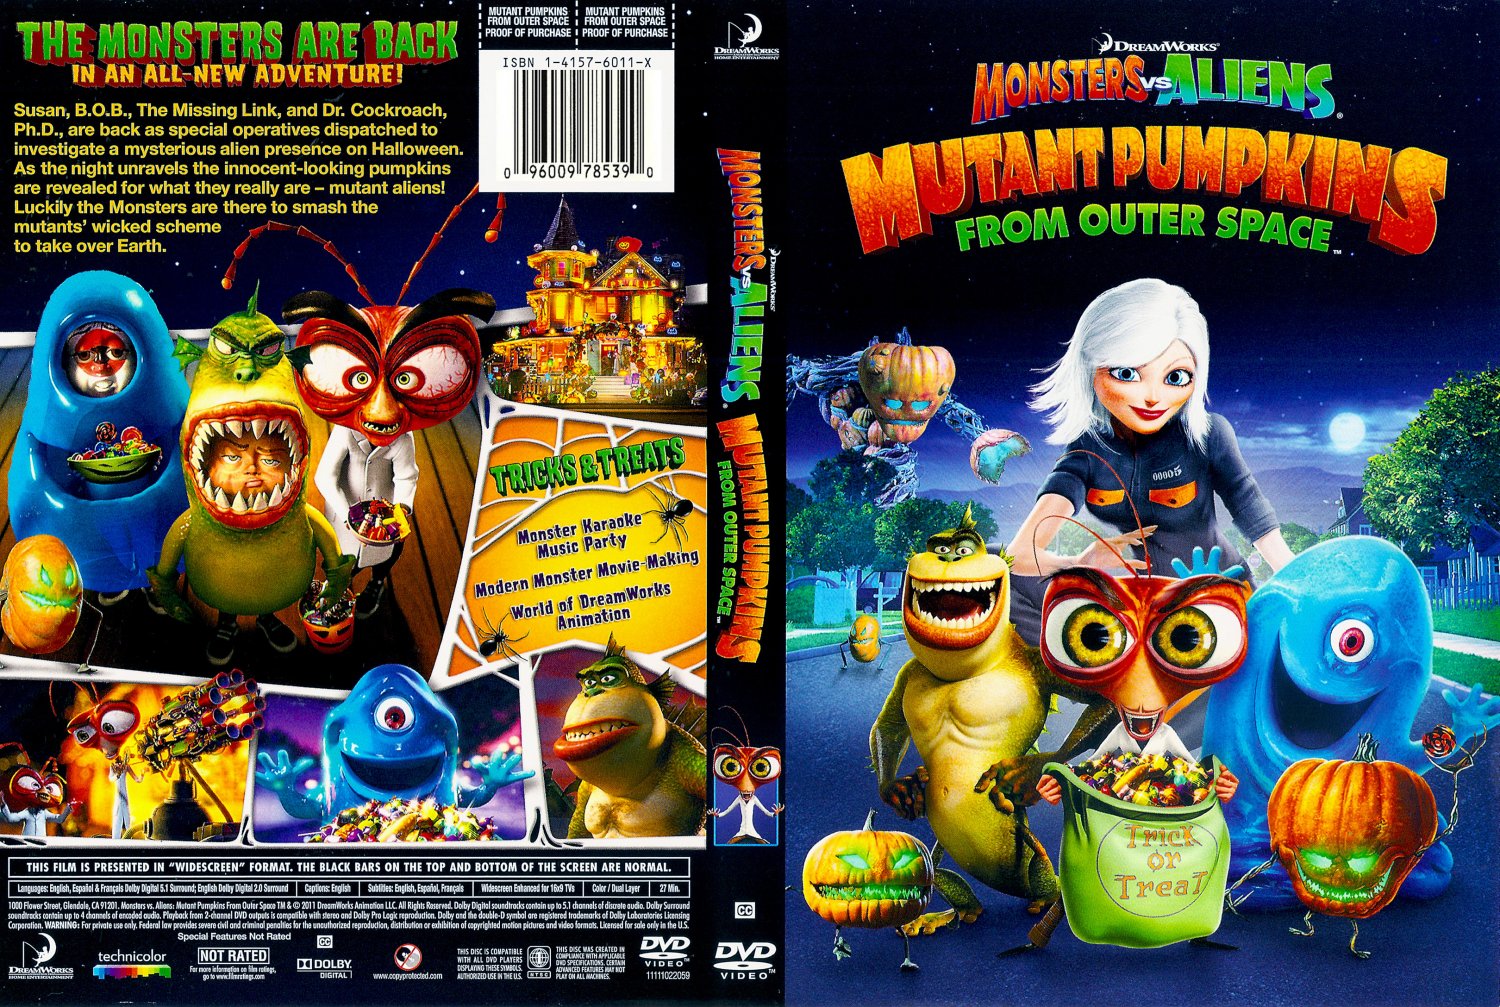 Monsters Vs Aliens Mutant Pumpkins From Outer Space- Movie DVD Scanned Cove...